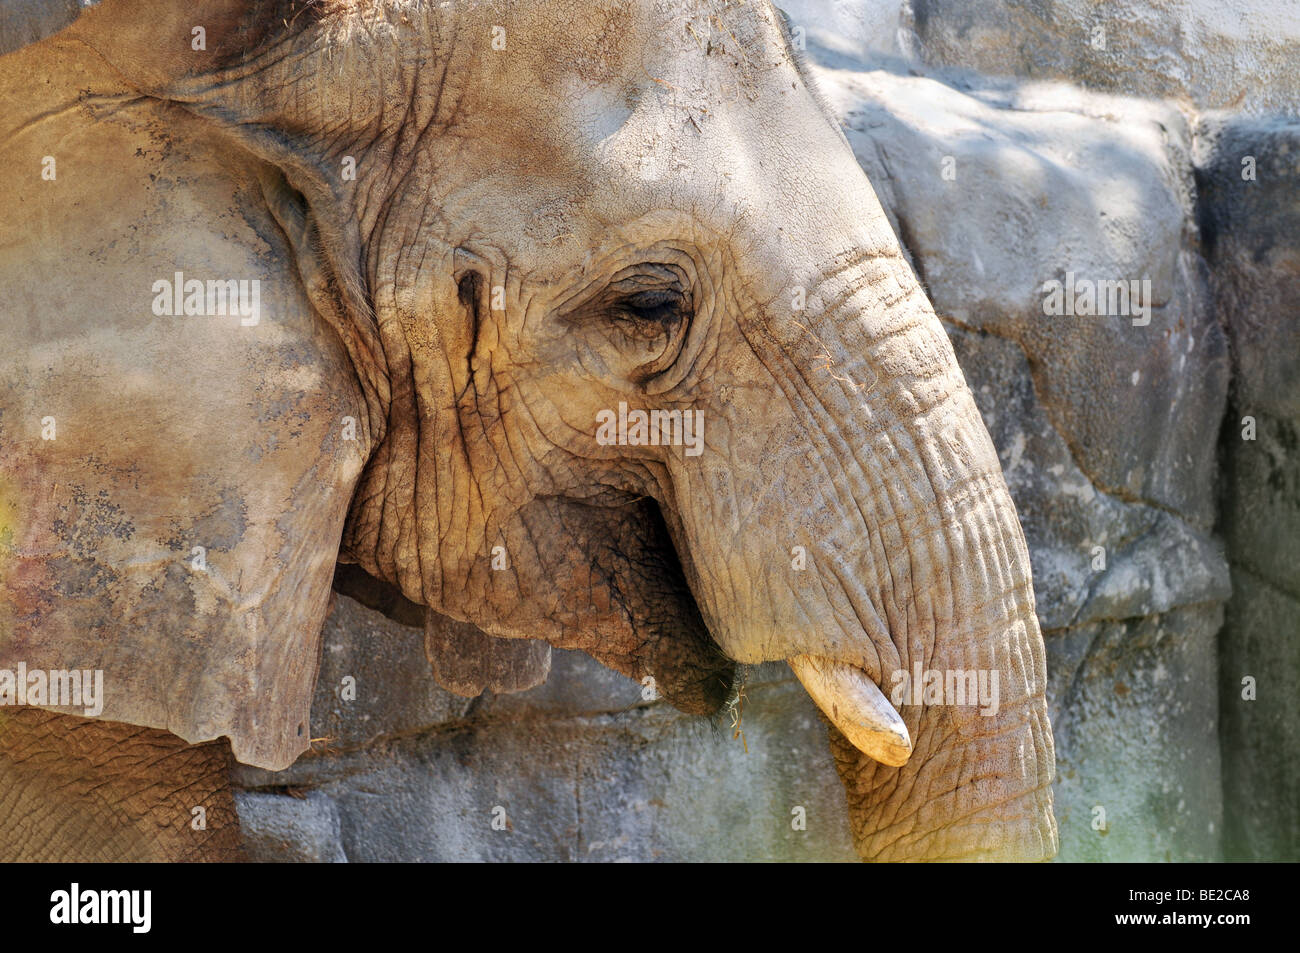 Close up portrait of African elephant Stock Photo